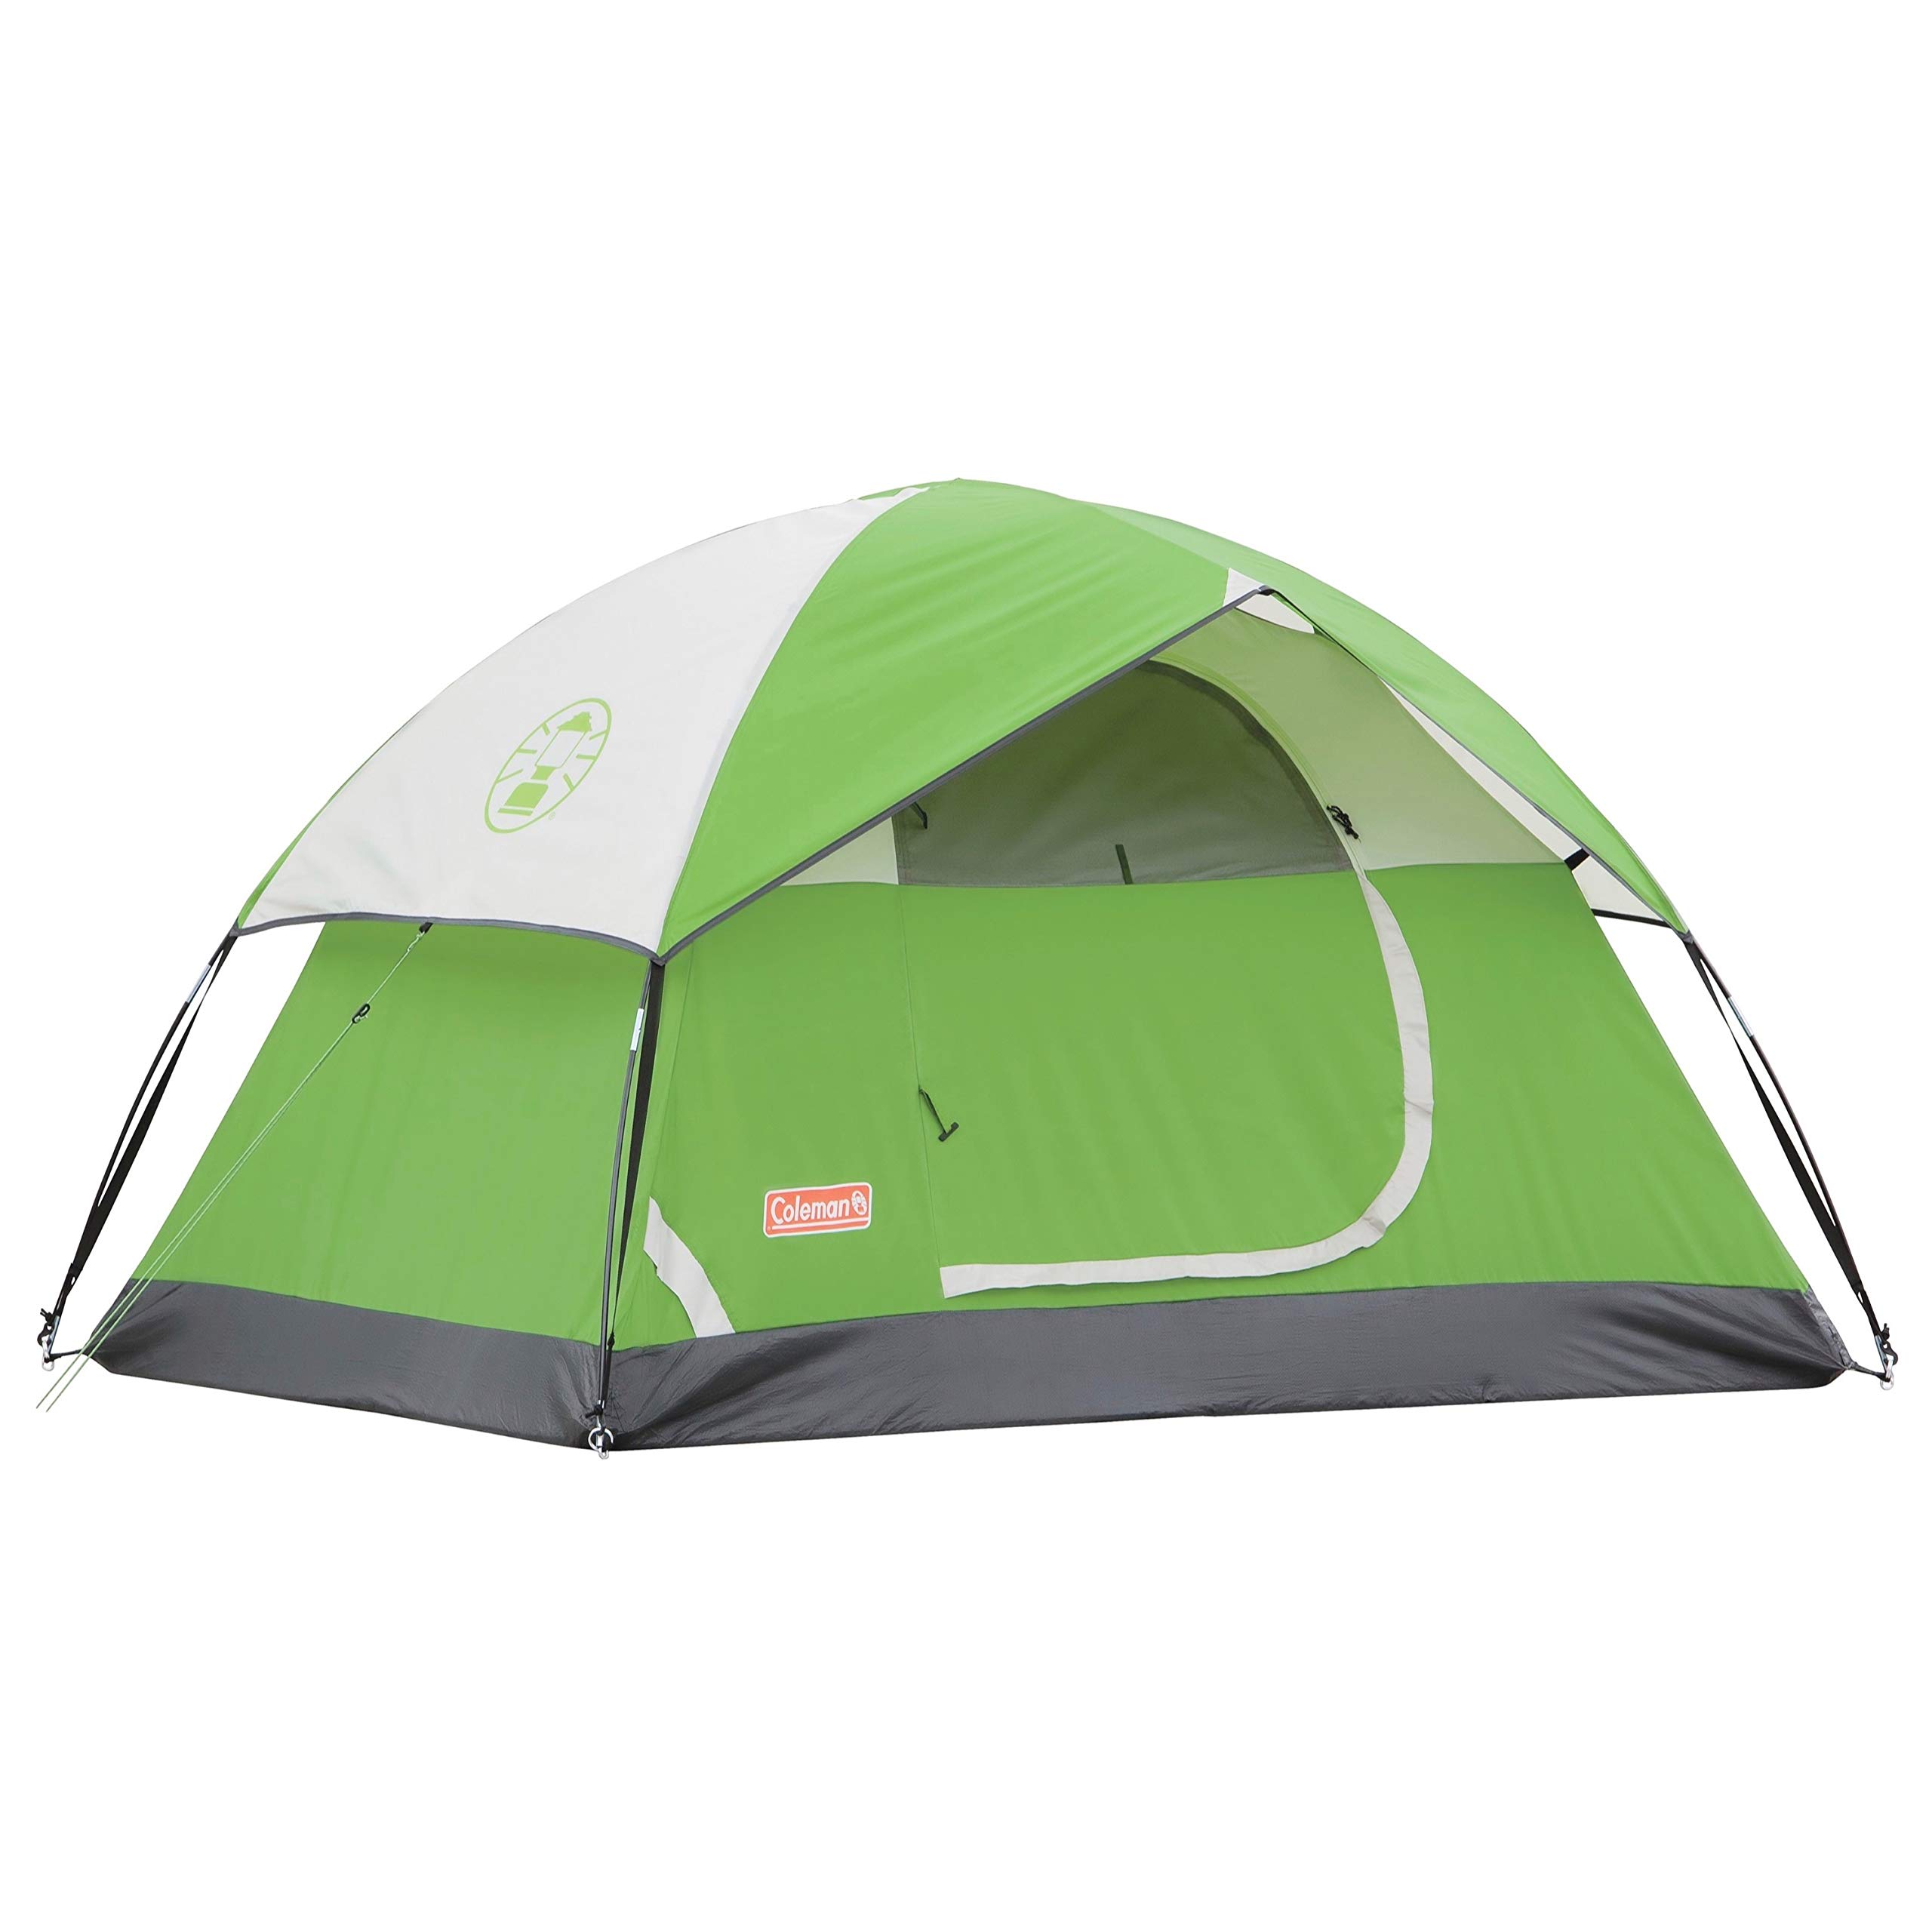 Book Cover Coleman Sundome Camping Tent, 2/3/4/6 Person Dome Tent with Easy Setup, Included Rainfly and WeatherTec Floor to Block Out Water, 2 Windows and 1 Ground Vent for Air Flow with Charging E-Port Flap 4 Person Palm Green